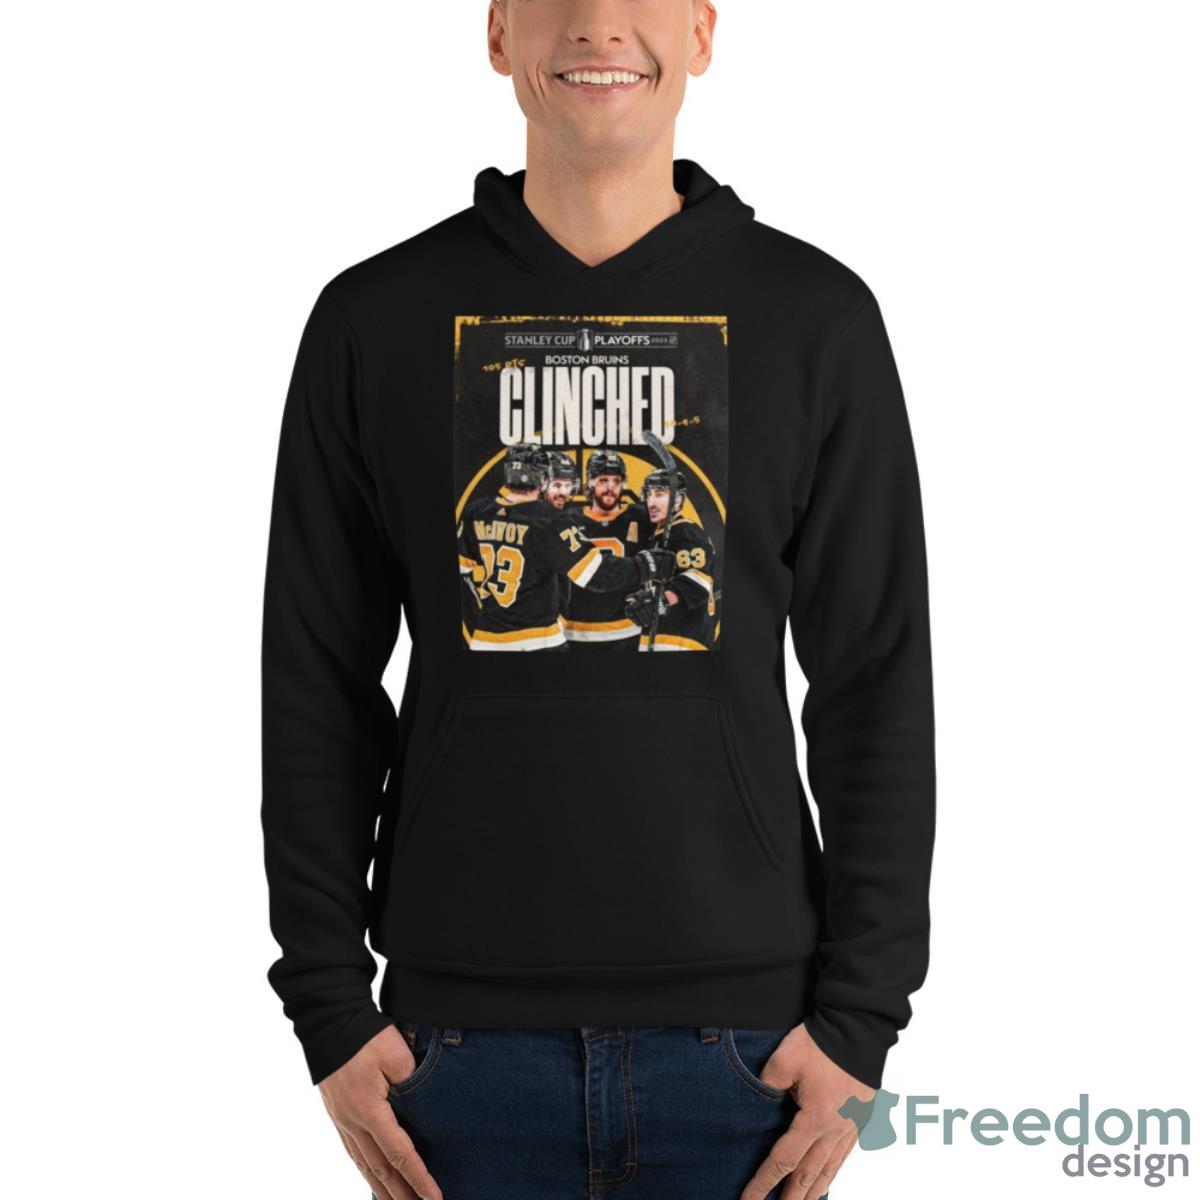 Boston Bruins Stanley Cup Playoffs 2023 Clinched Shirt